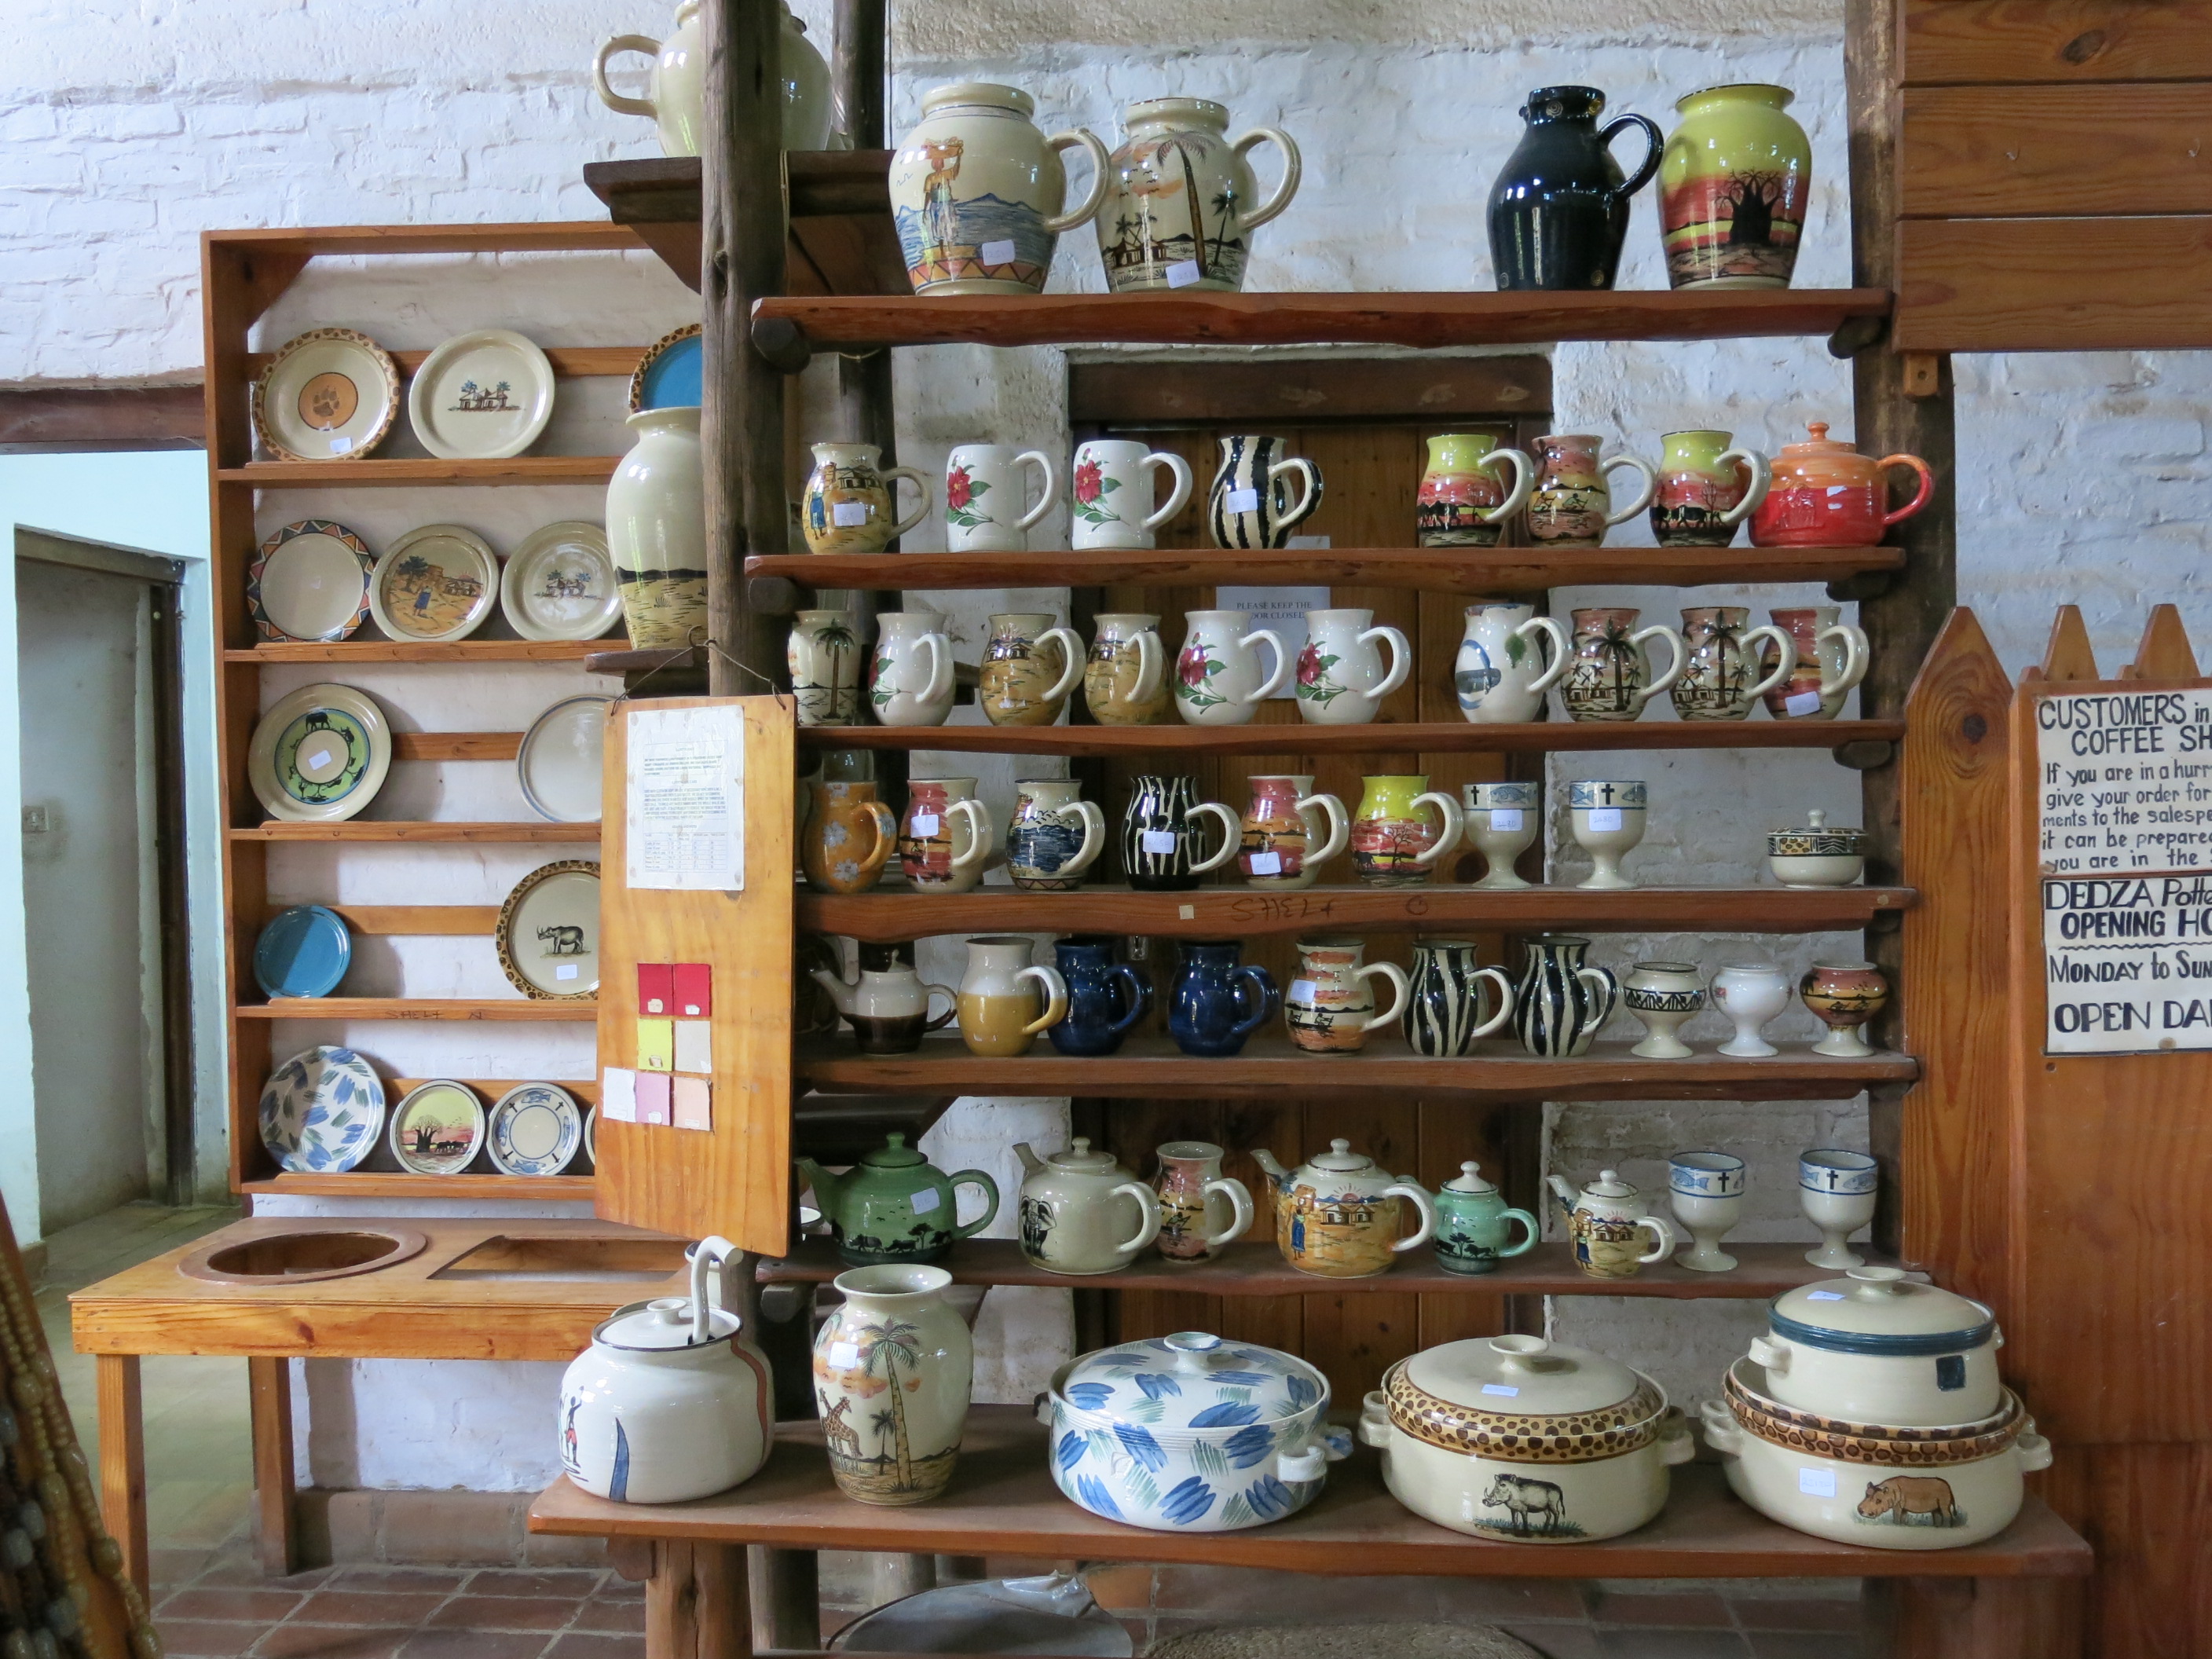 Dedza Pottery and Lodge - Food and the World